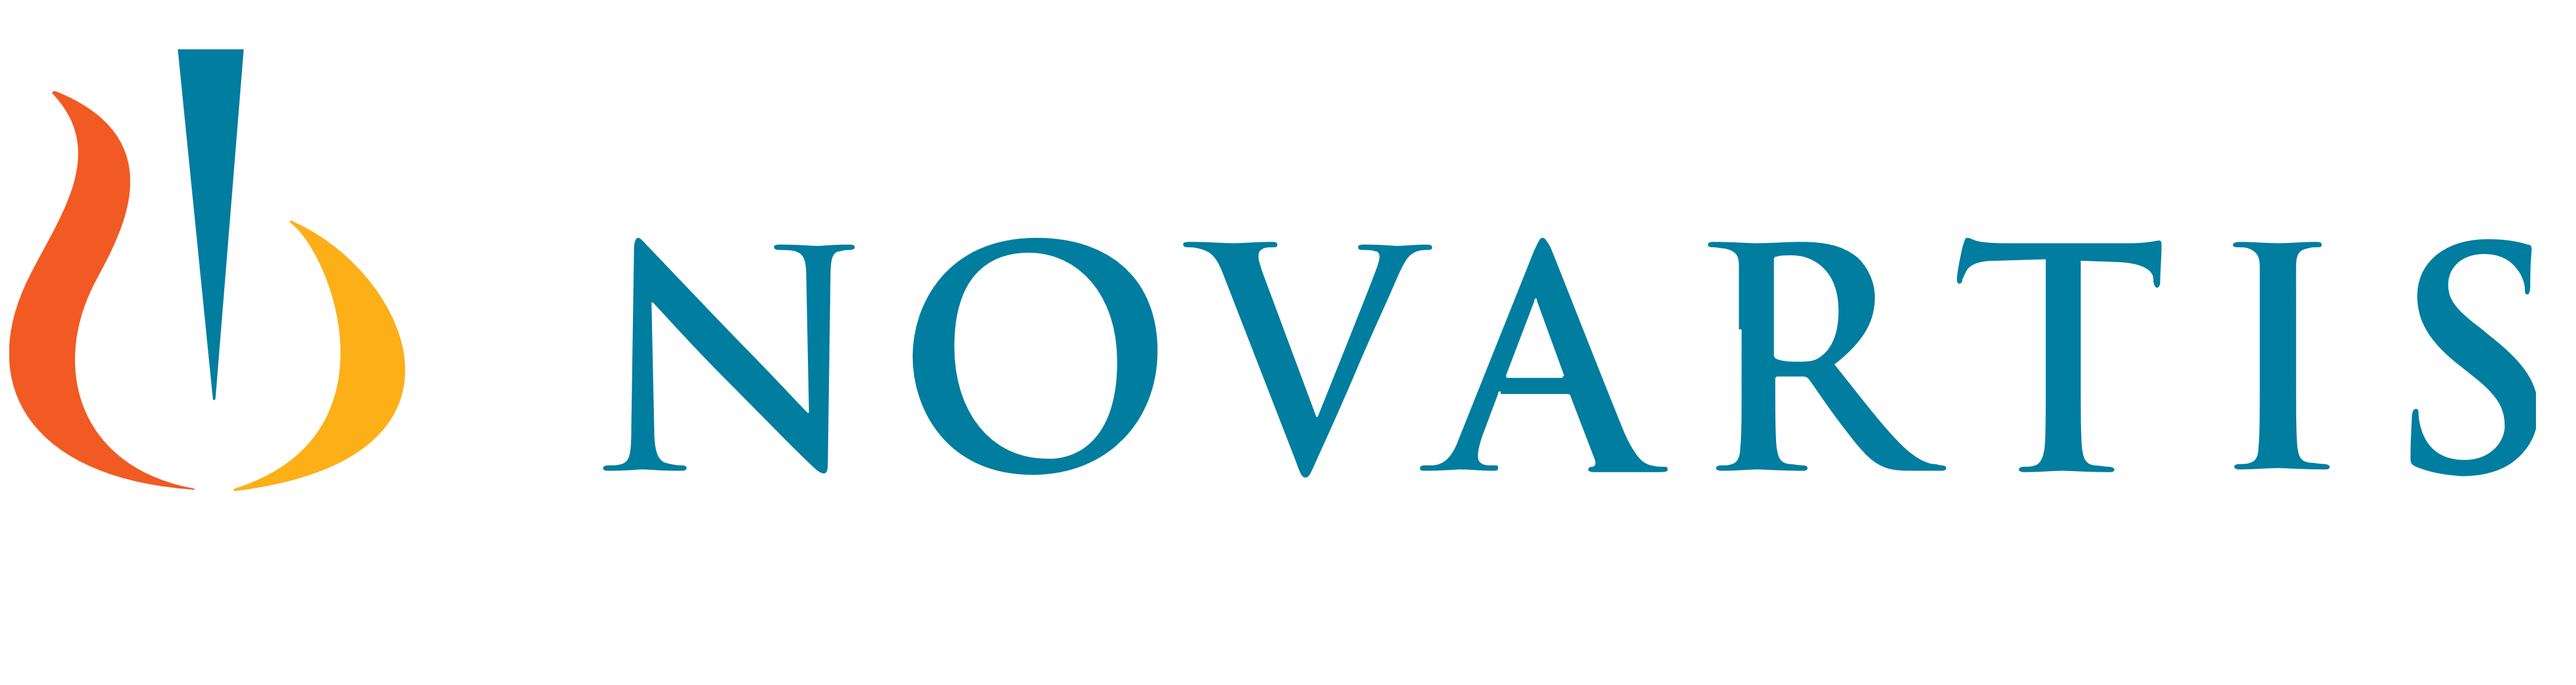 novartis are a company who place an importance on diversity and inclusion